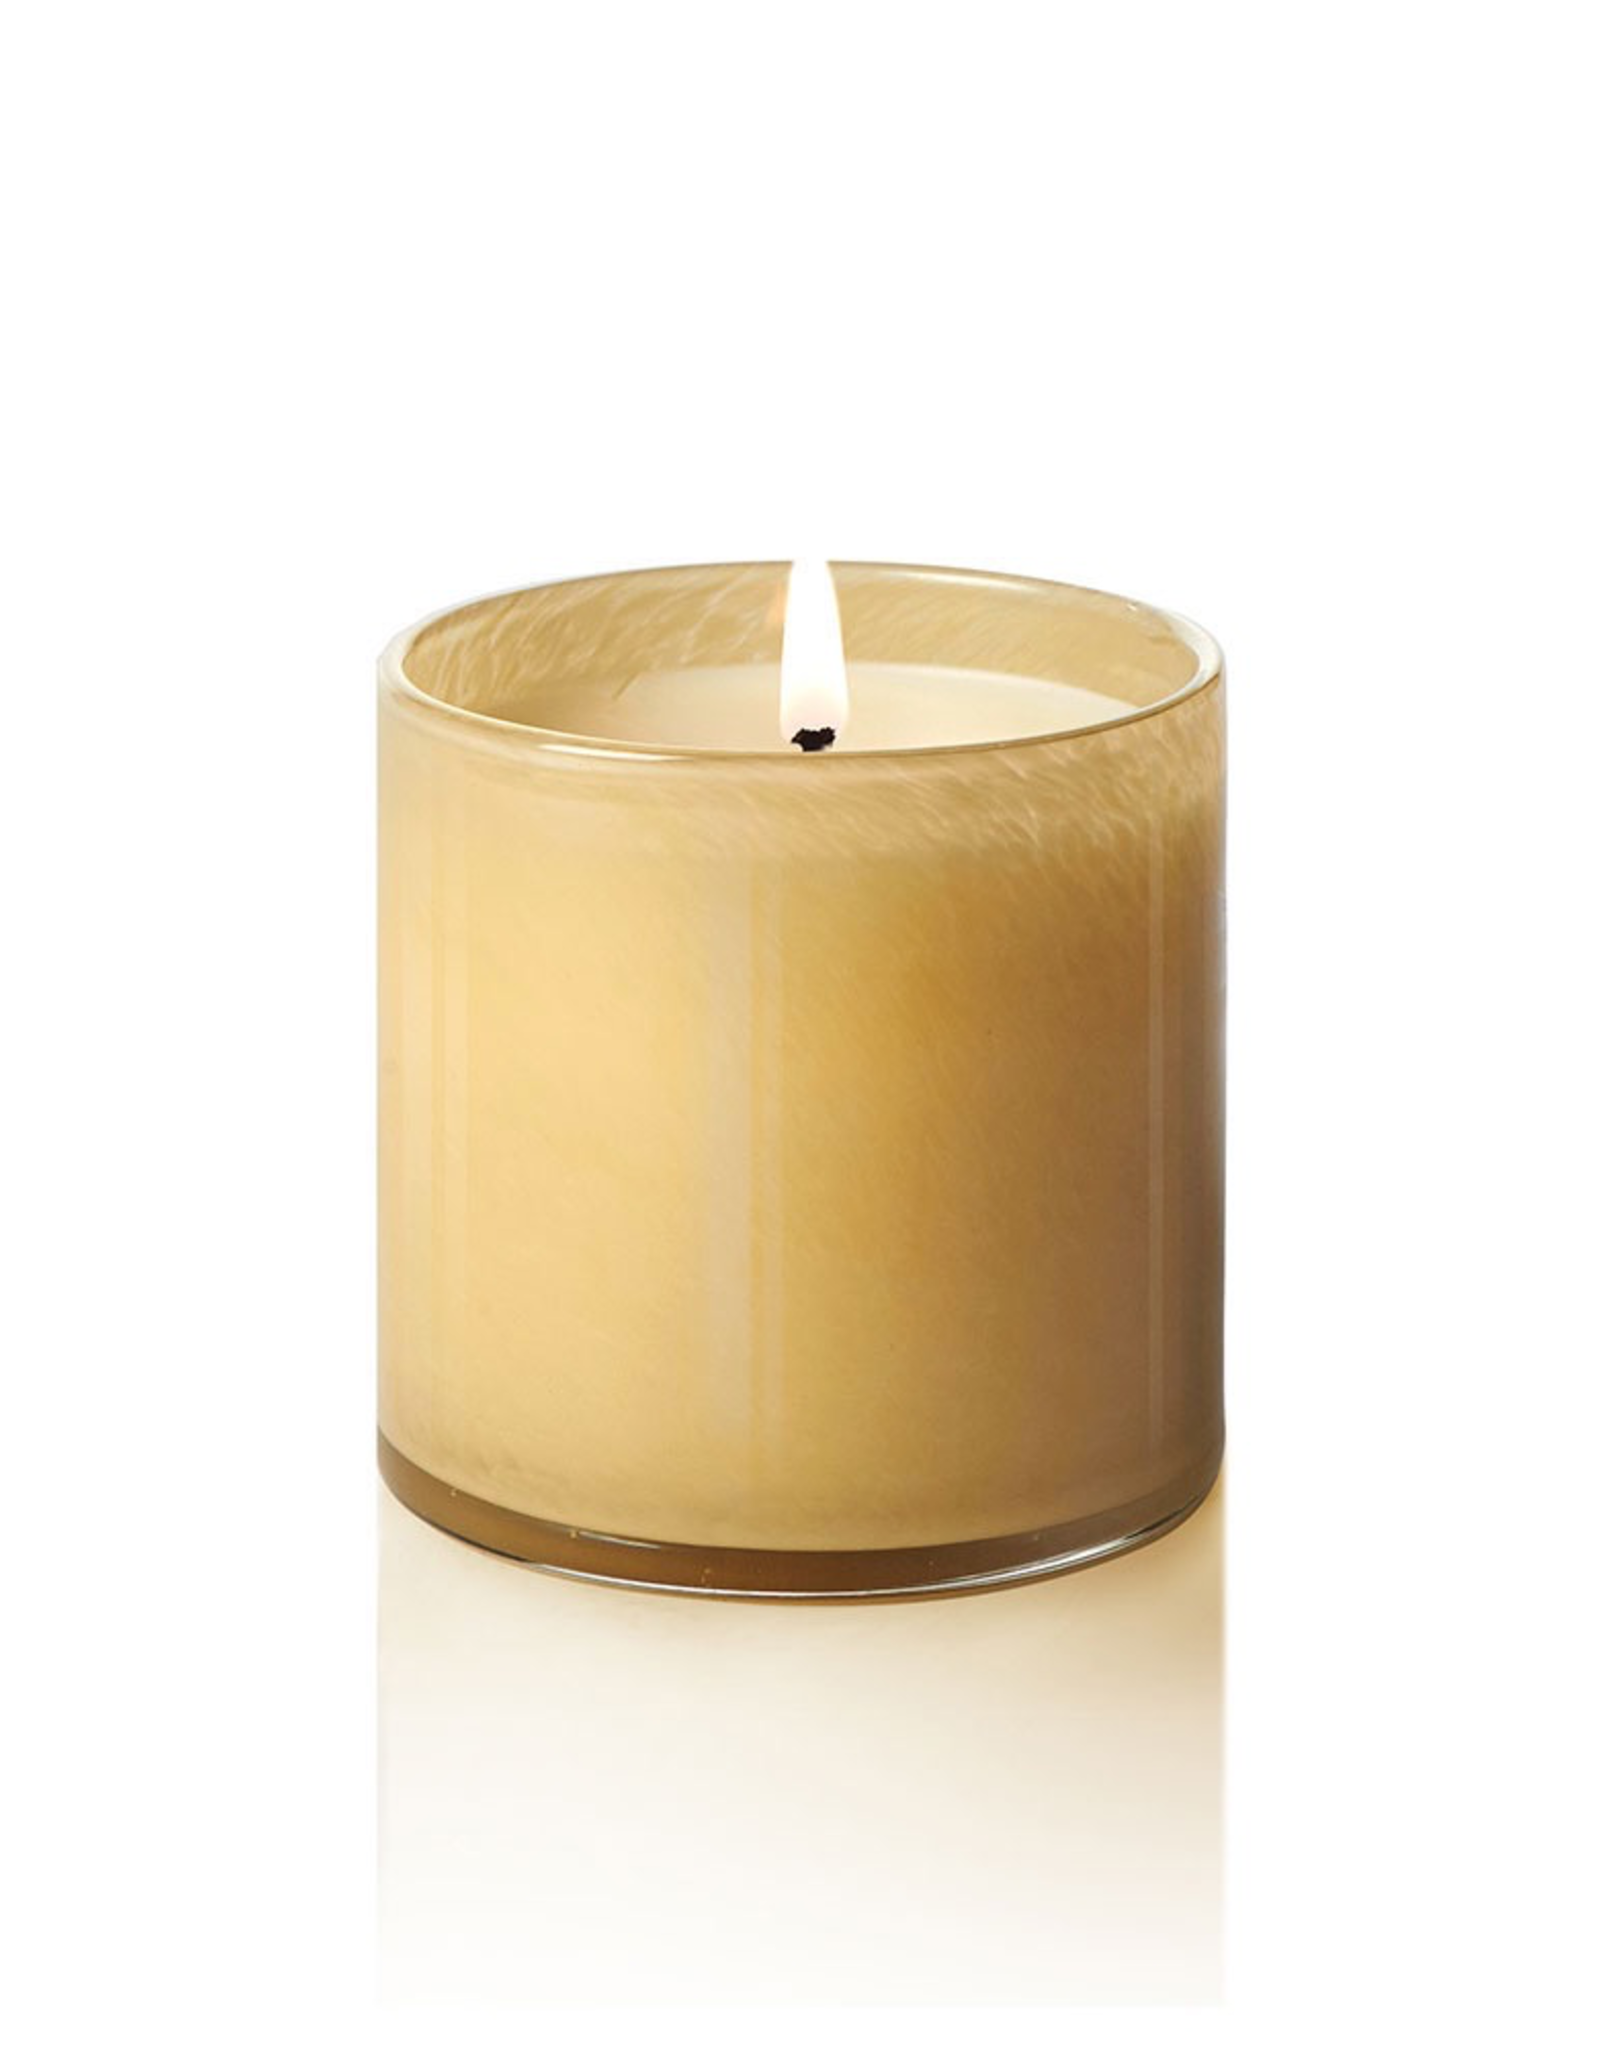 Chamomile Lavender Bedroom Lafco Candle